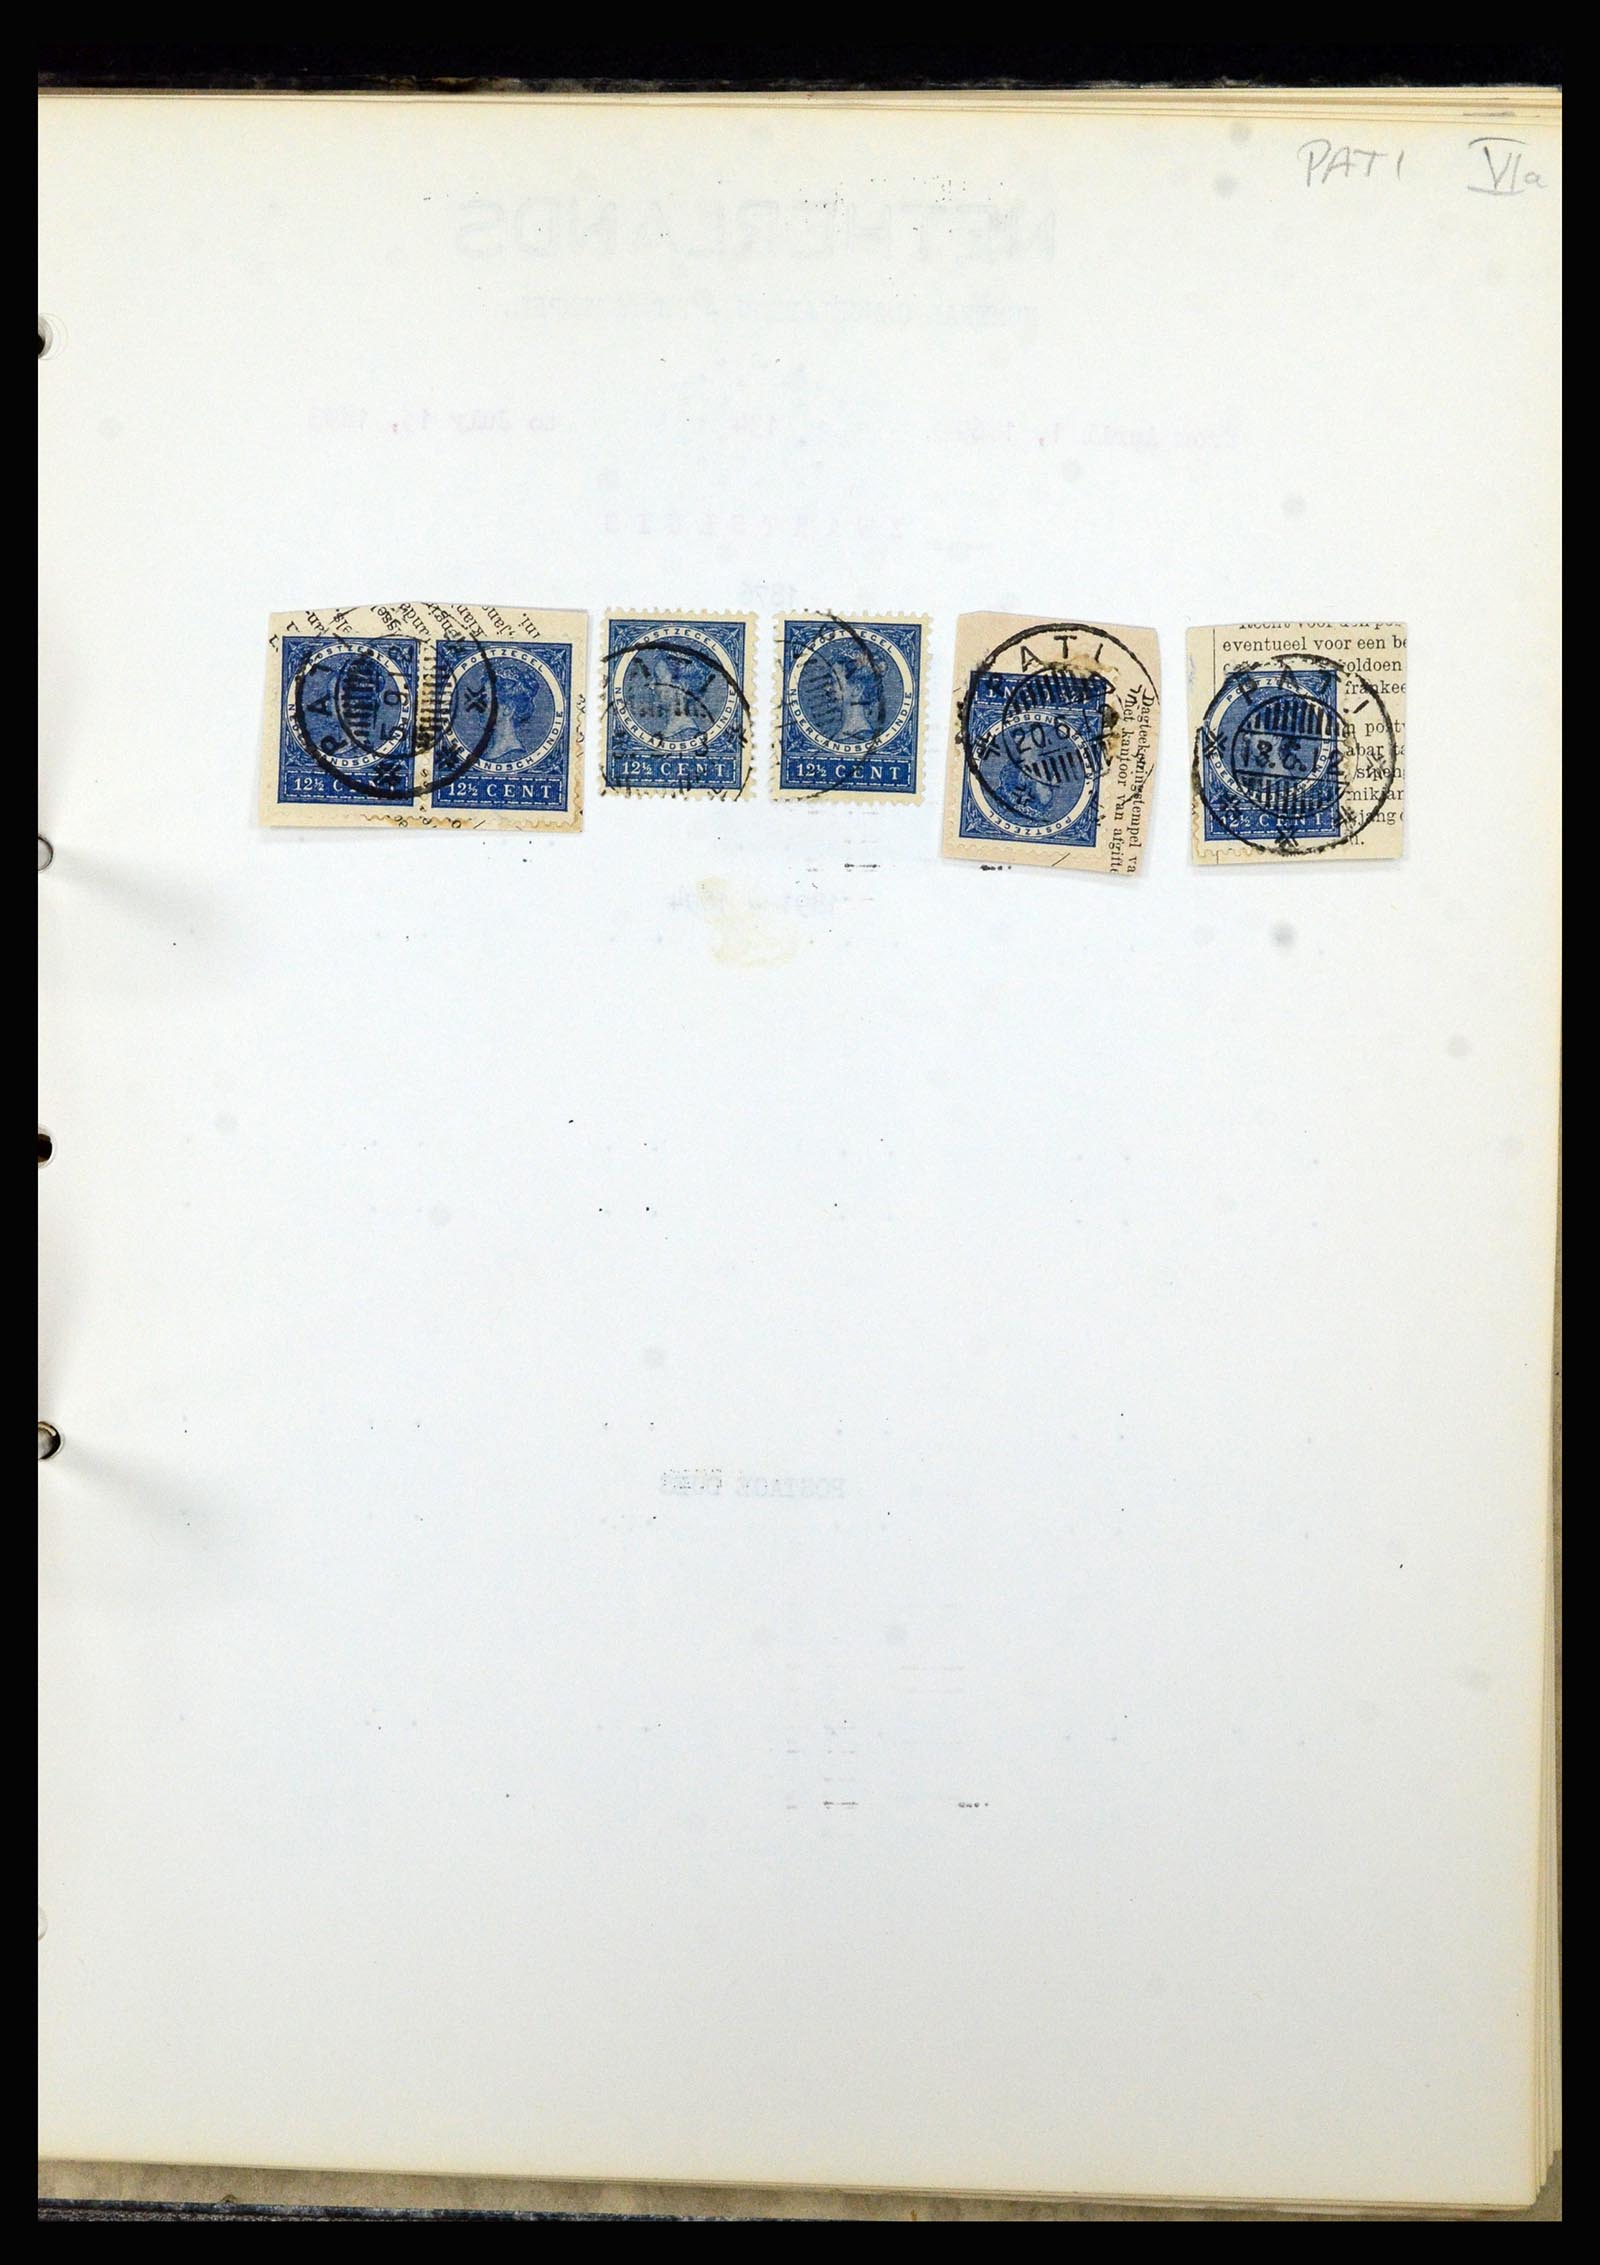 36841 087 - Stamp collection 36841 Dutch east Indies short bar cancels.